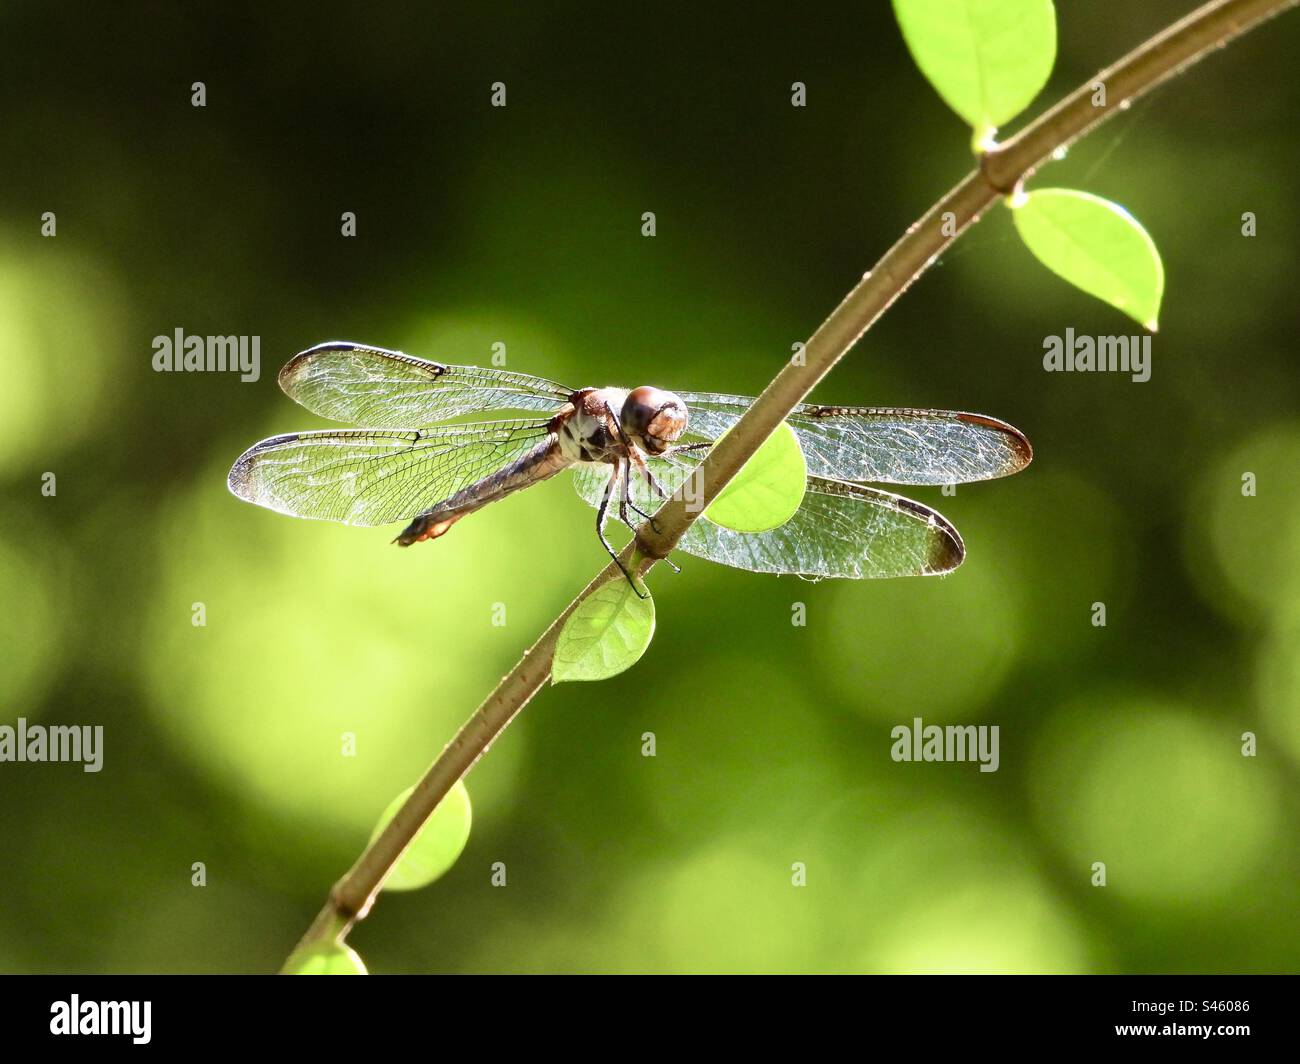 Loss of wetland habitat threatens dragonfly populations around the world. Adult dragonflies are characterized by a pair of large, multifaceted, compound eyes, two pairs of strong, transparent wings Stock Photo